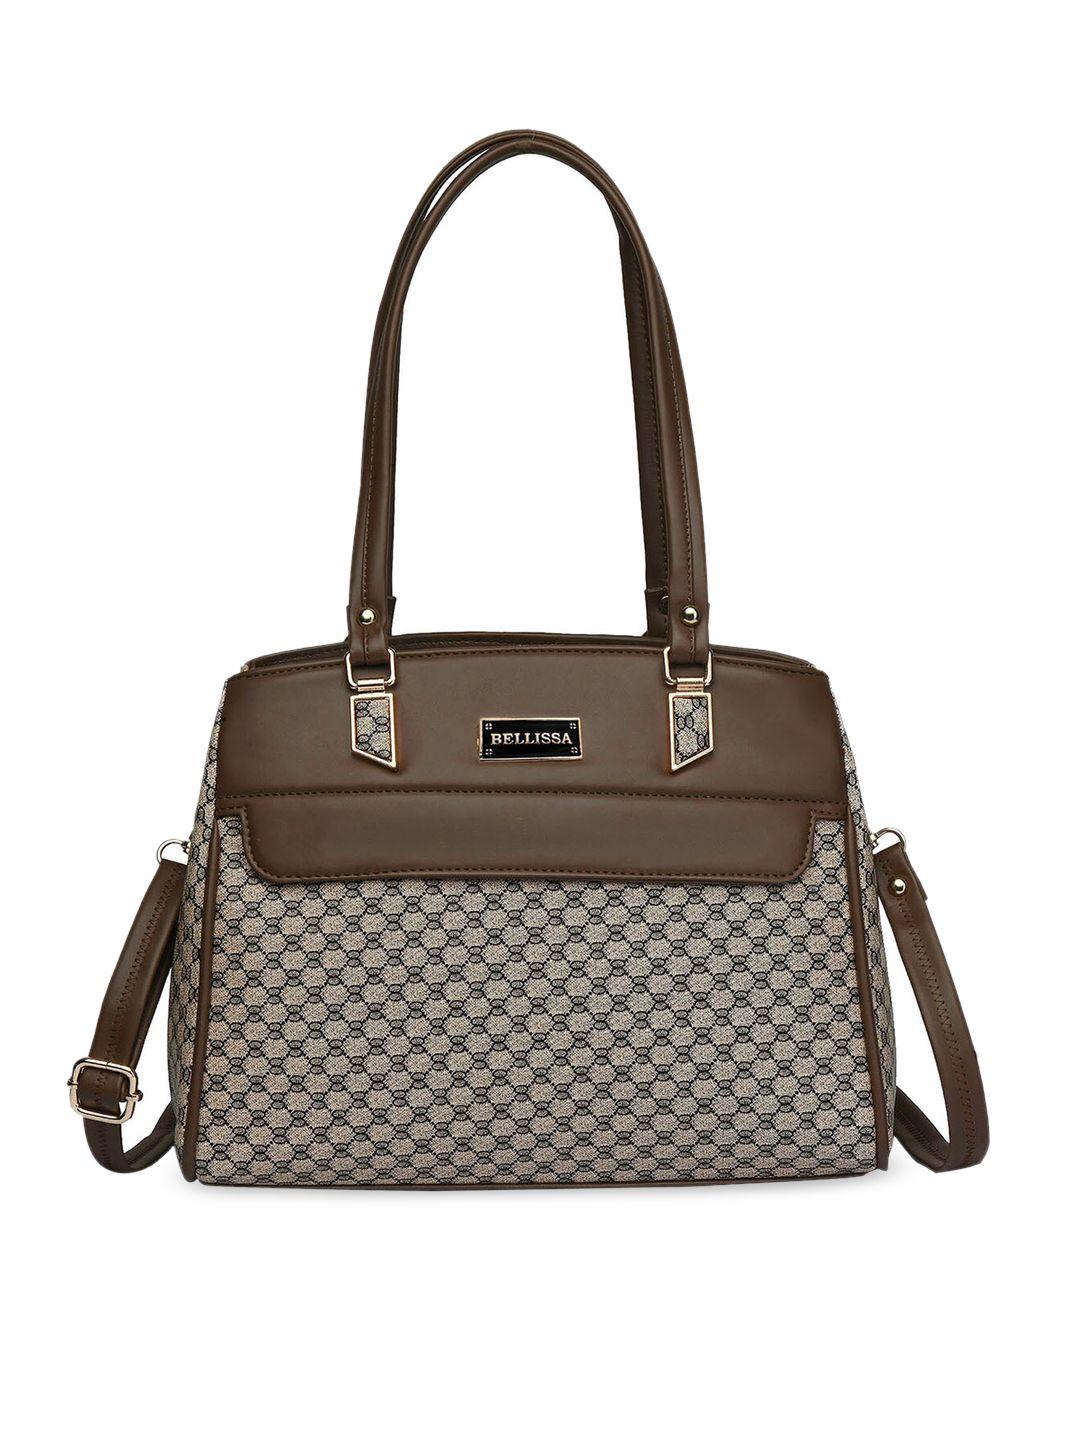 bellissa brown structured handheld bag with quilted